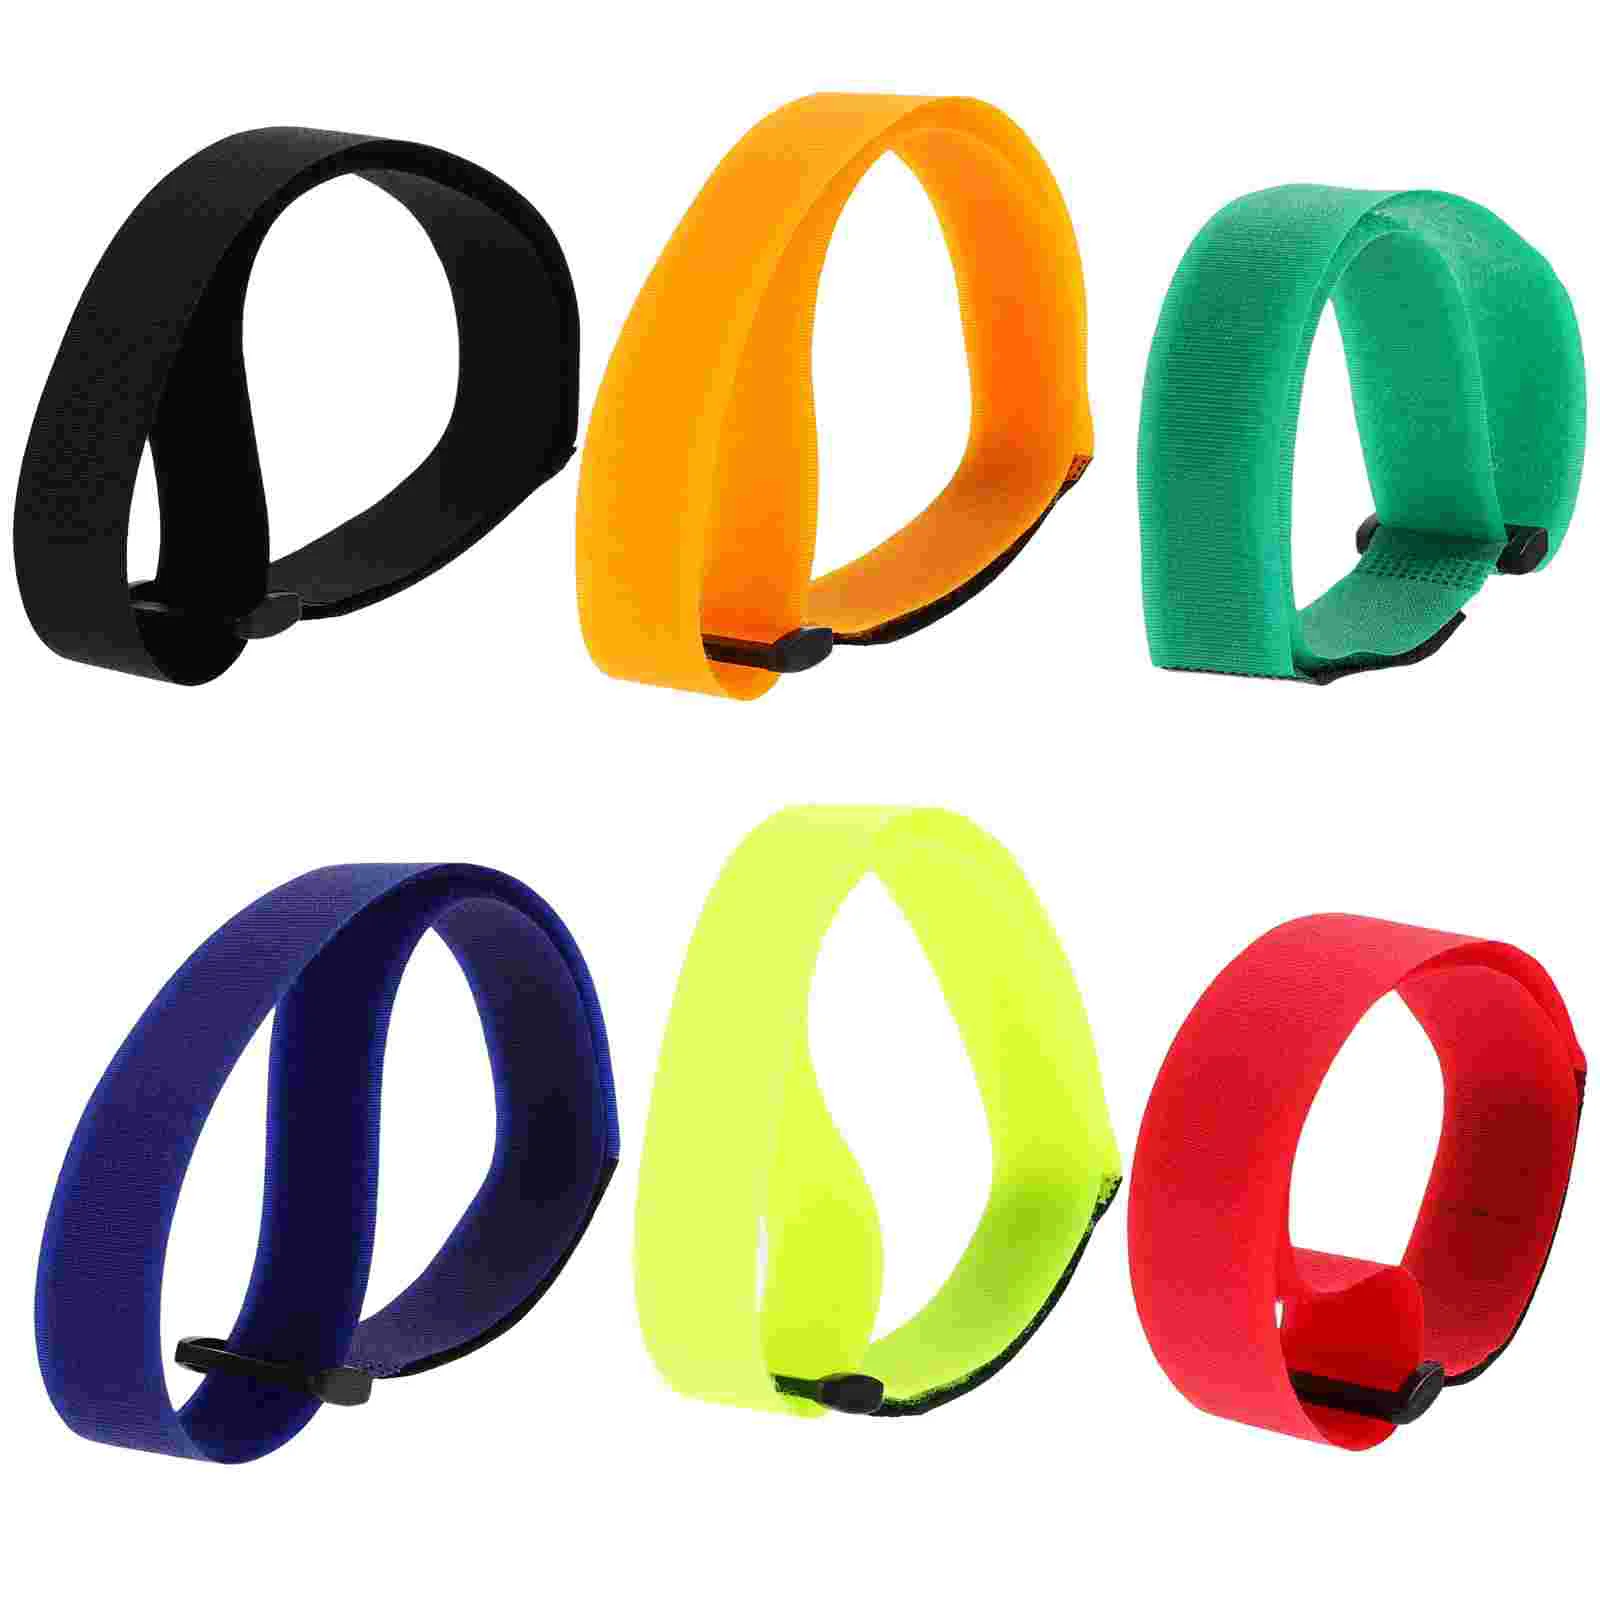 

Bike Strap Accessories Cable Securing Straps Hook Loop Tapes Sticky Tire Buckles Electrical Ties